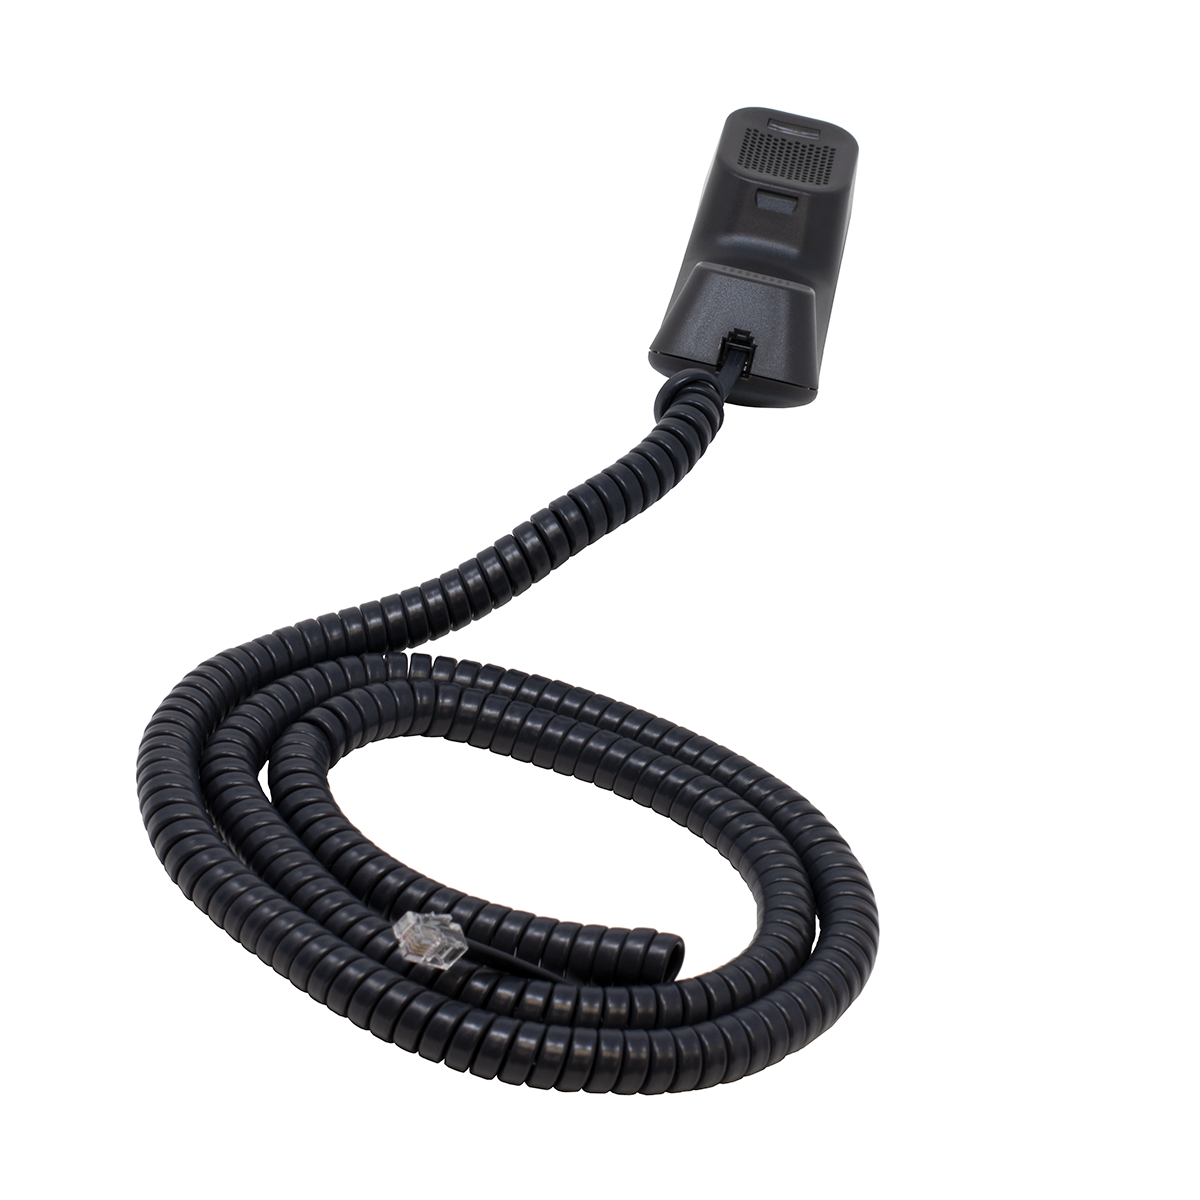 25' Charcoal Gray Coiled Handset Cord (Handset View)